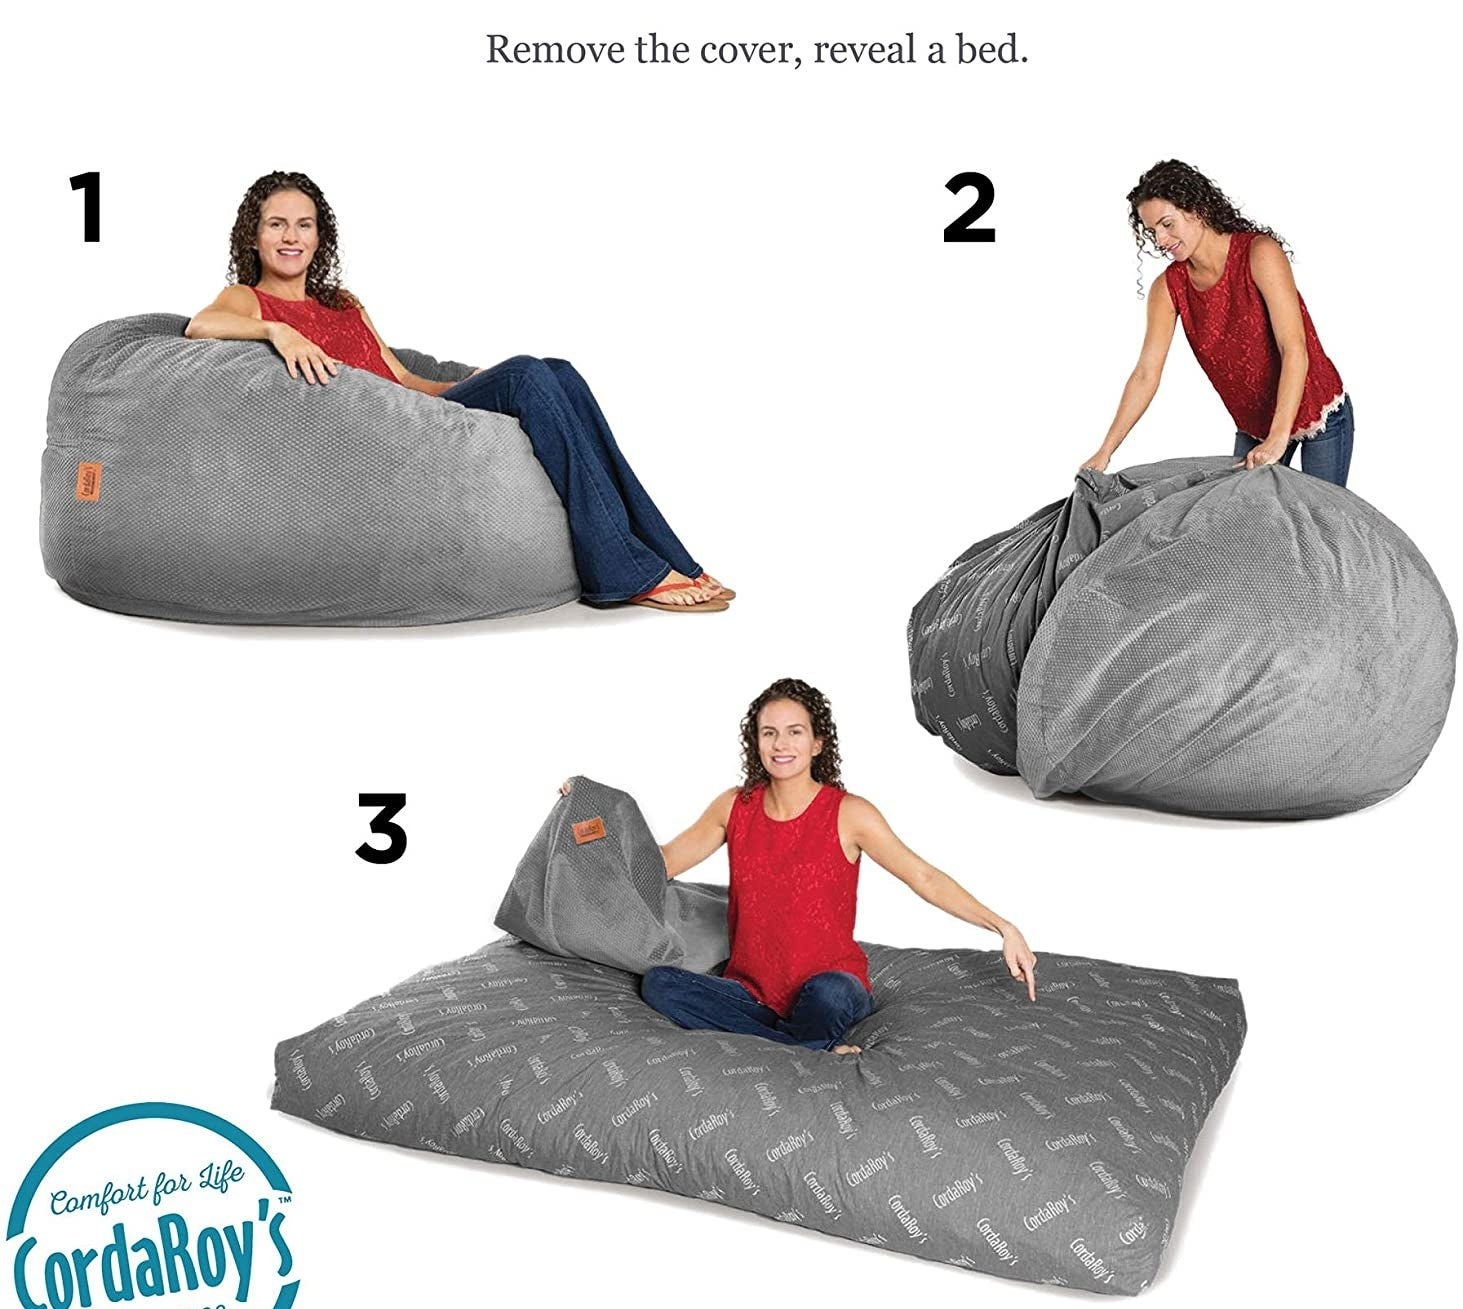 Model showing how to turn the beanbag chair into a bed